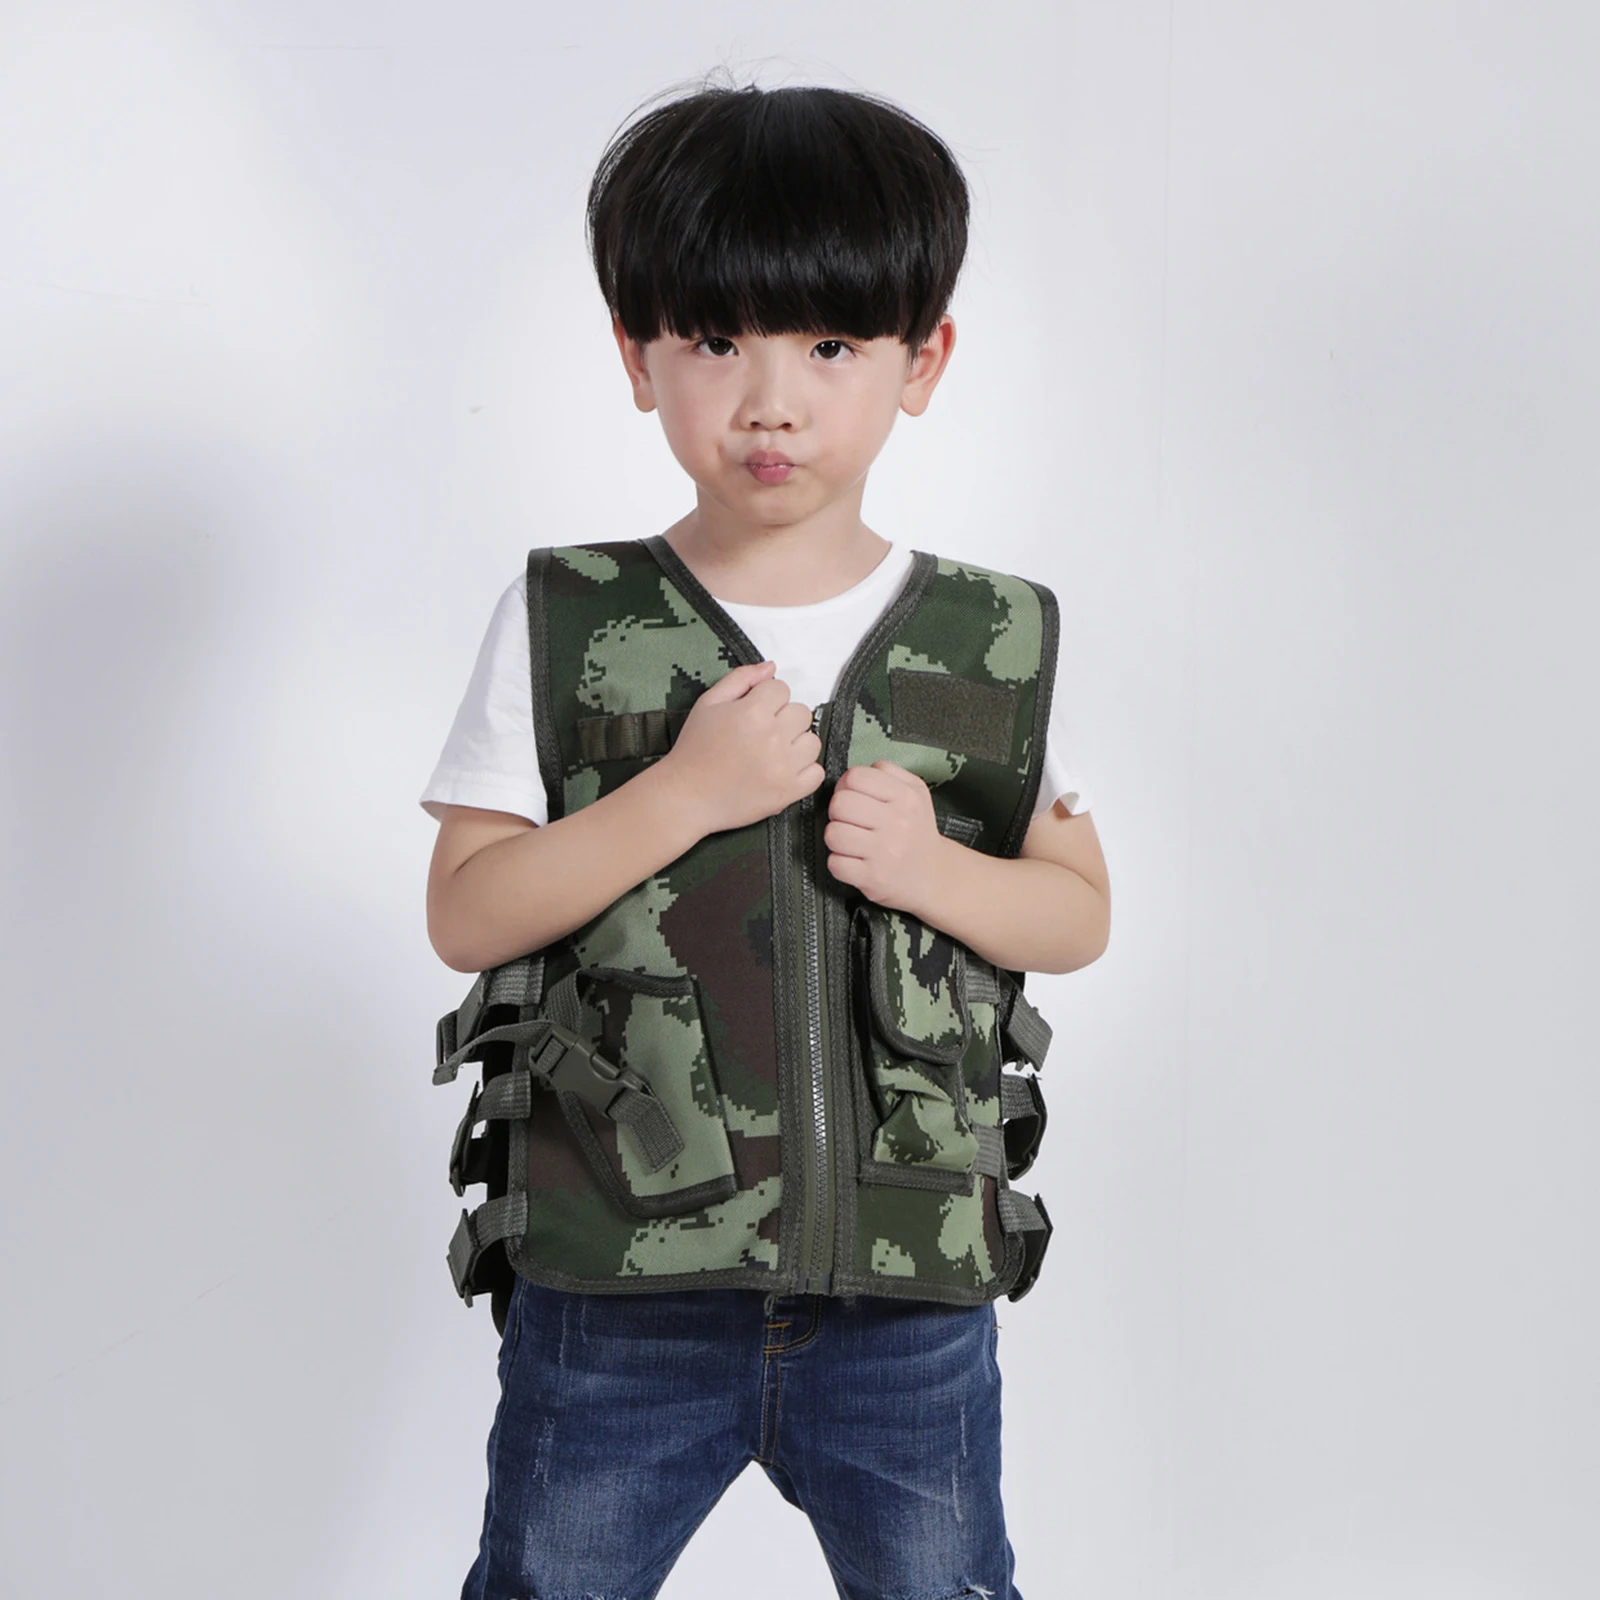 Kids Tactical Vest Holster Waistcoat Assault Gear Army Plate Carrier Outdoor Boys Camping Hunting Combat Games Training Vest